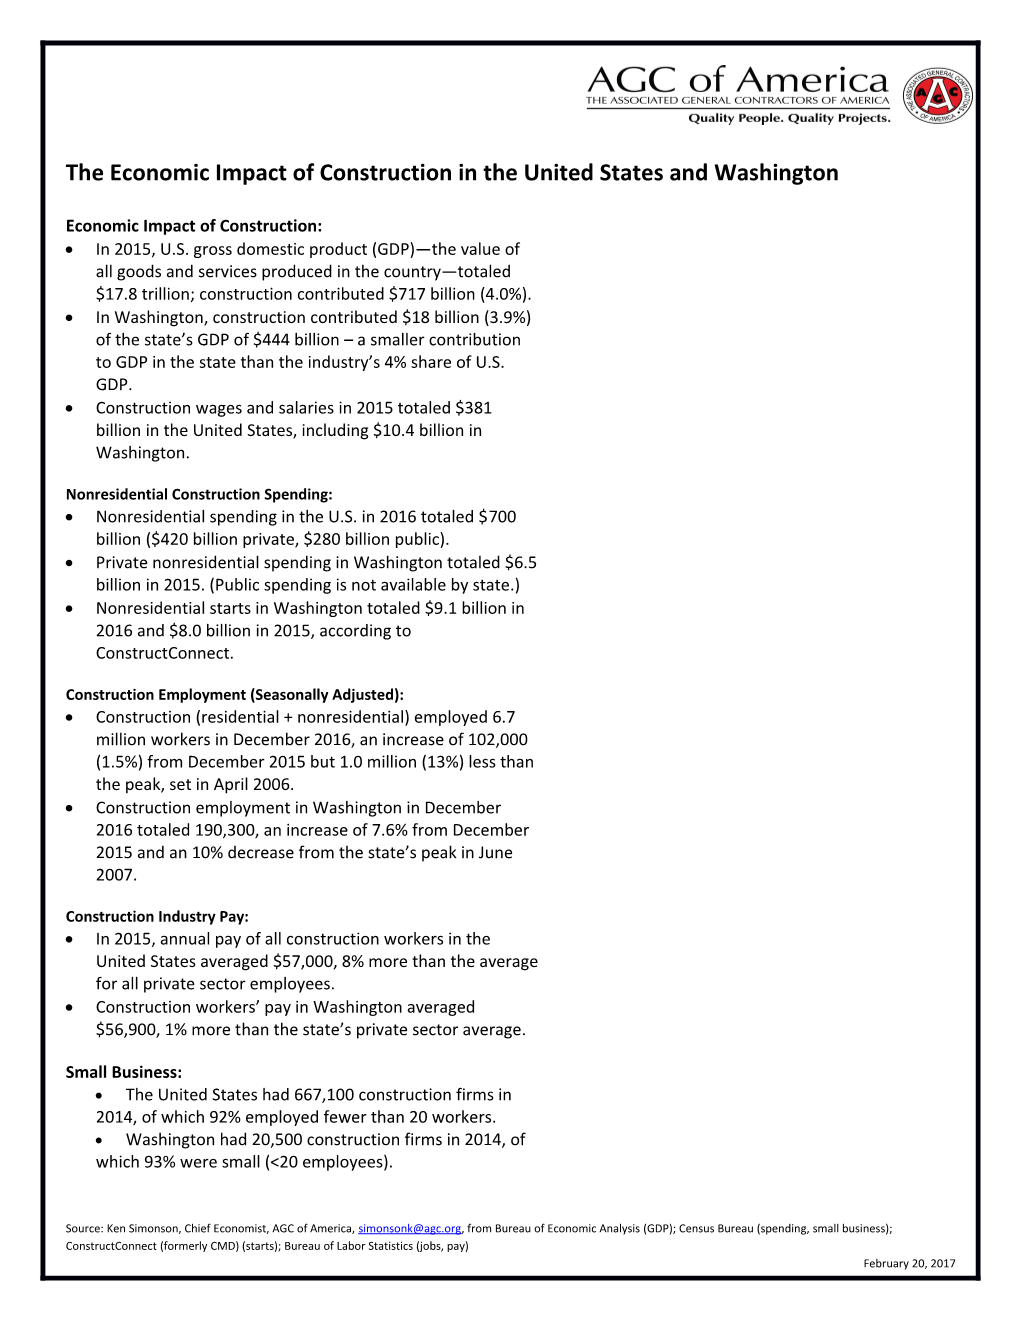 The Economic Impact of Construction in the United States and Washington